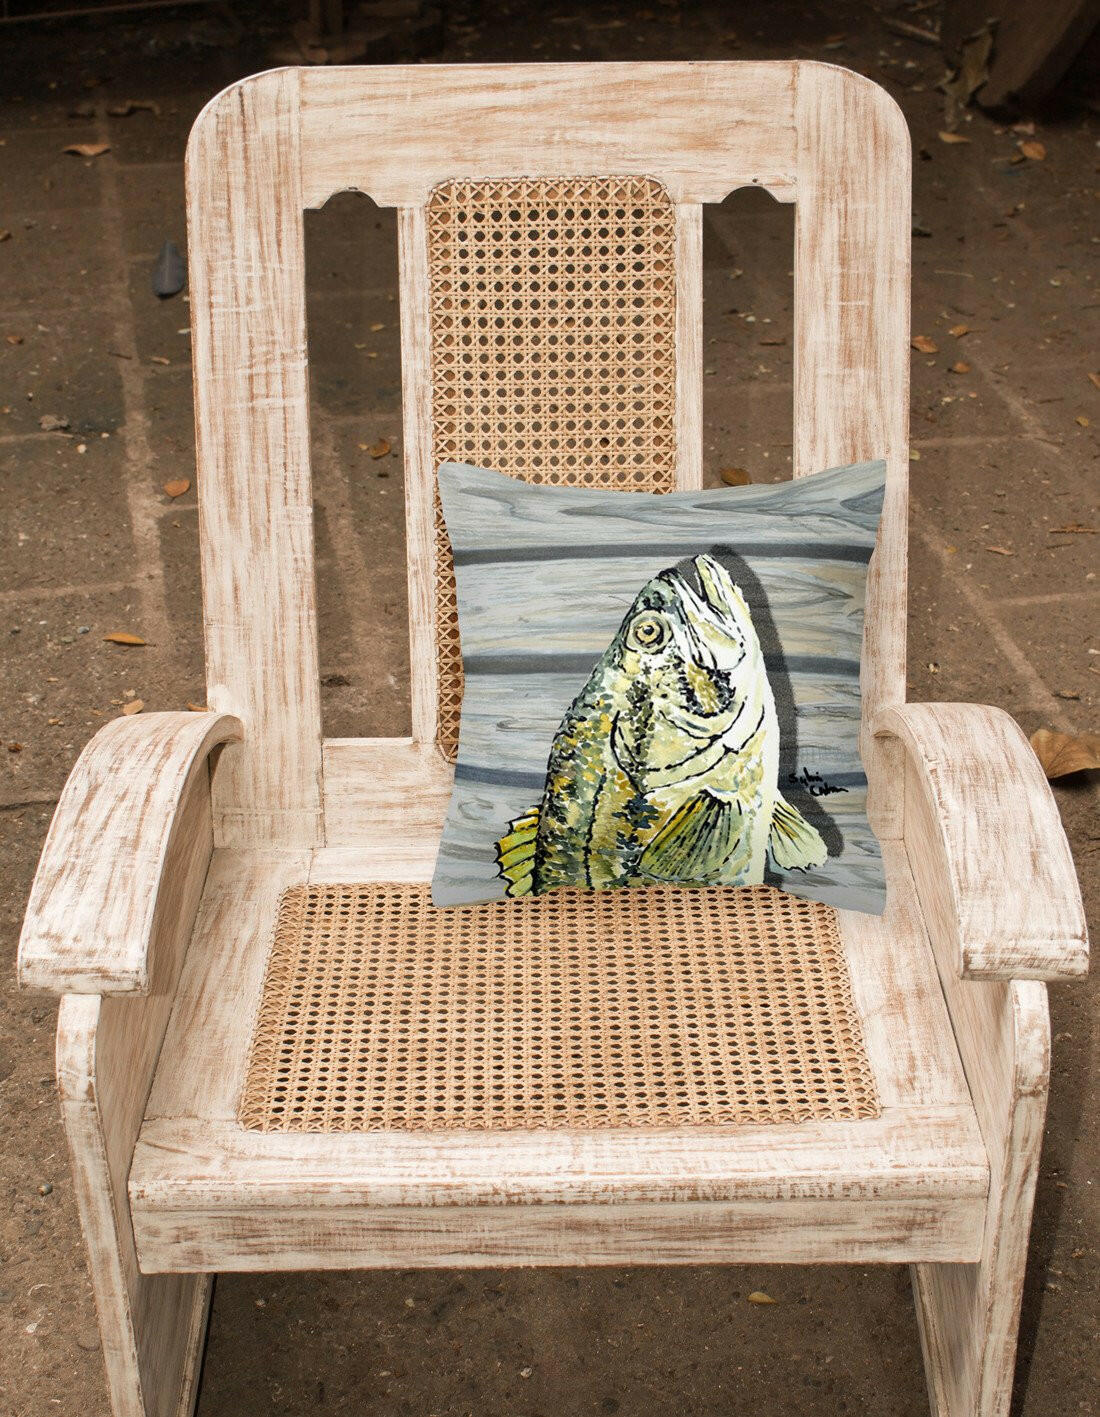 Fish Bass Small Mouth Fabric Decorative Pillow 8493PW1414 - the-store.com